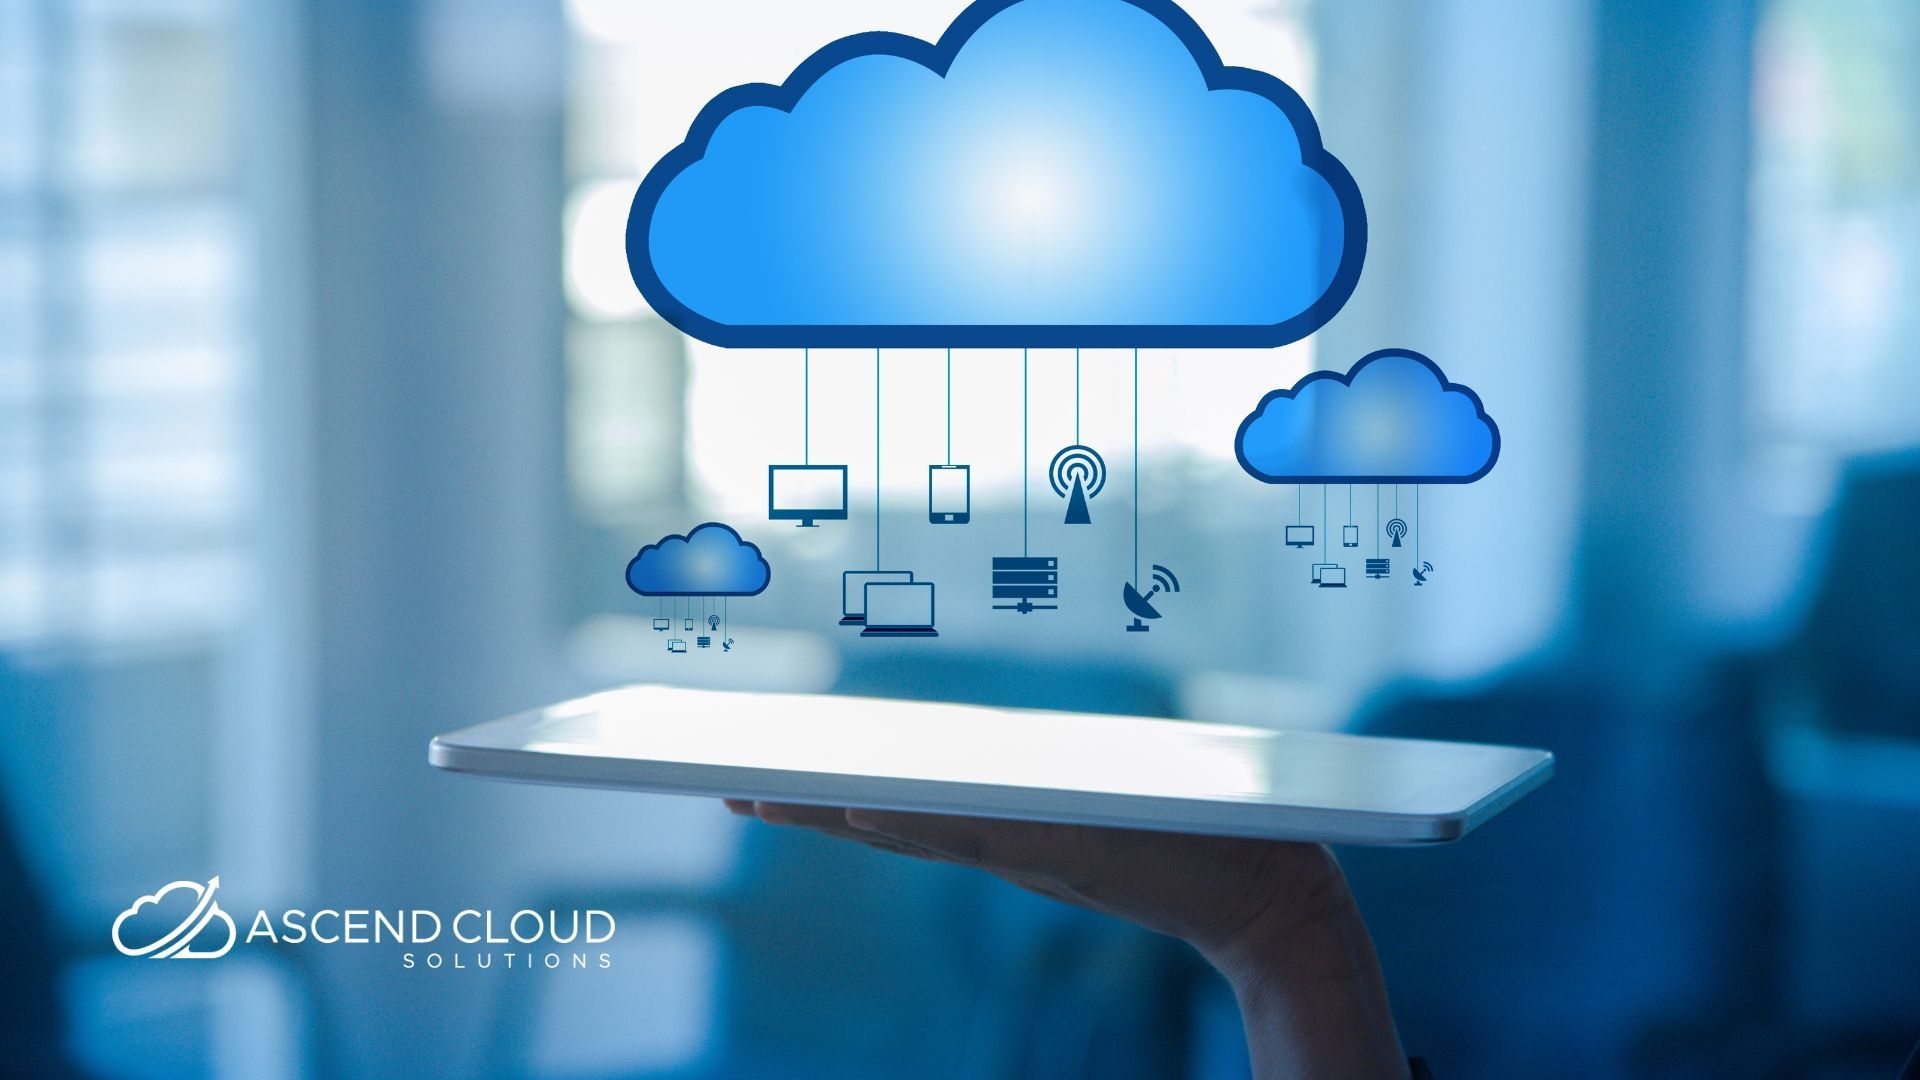 Is your cloud provider no longer meeting your business requirements? It may be time to switch. But when is the right time? Find out in our article.